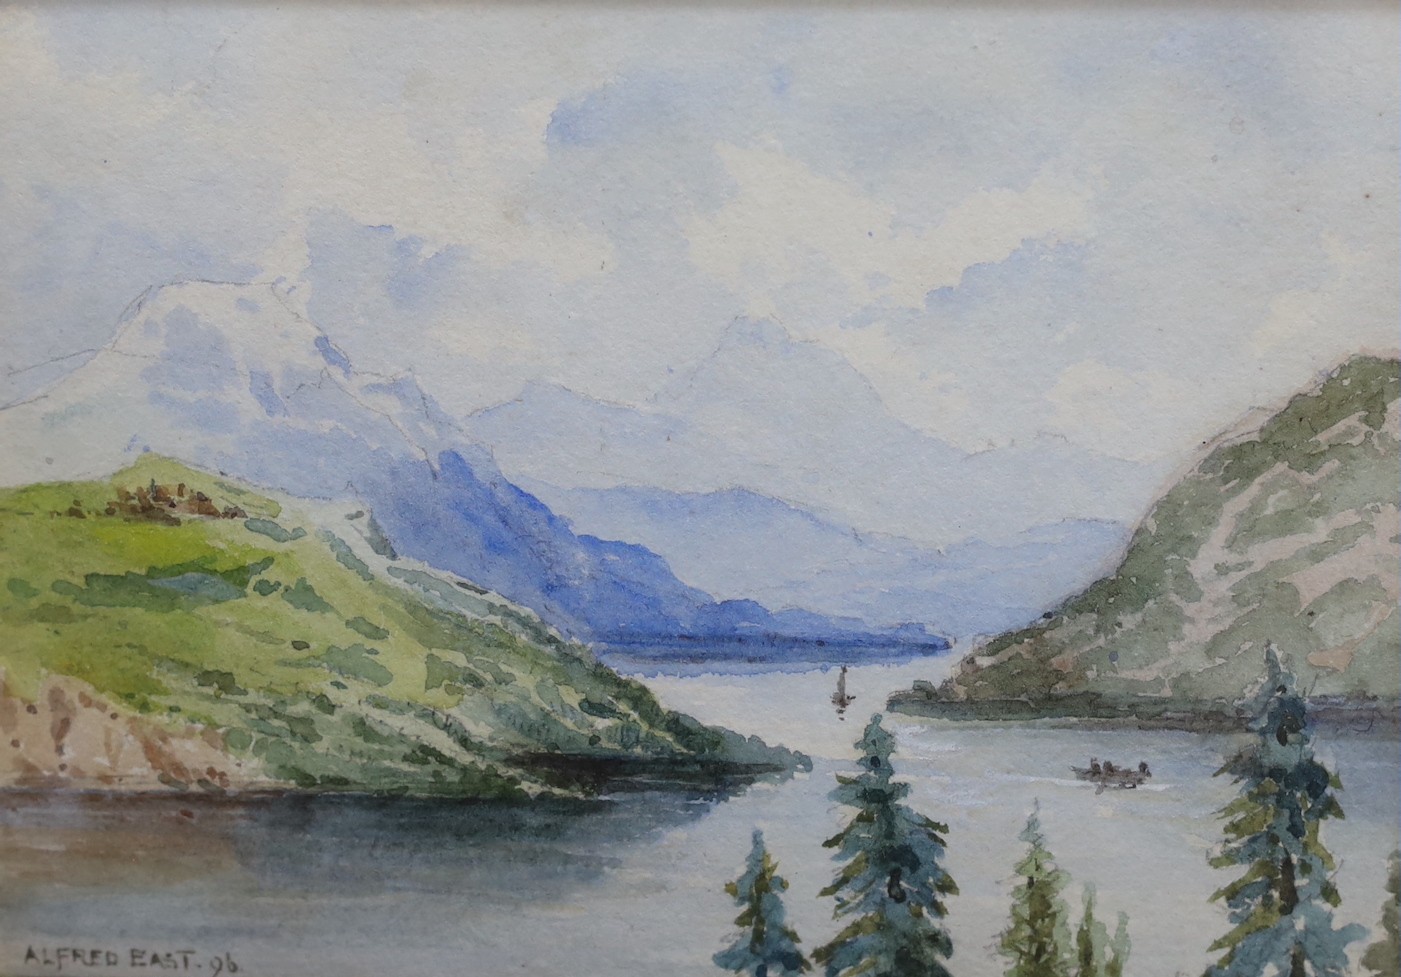 Sir Alfred East (1849-1913), two watercolours, Alpine scenes, both signed, one dated '96, 12 x 18cm and 12 x 17cm, with a small watercolour View of Sydenham, Kent, by another hand